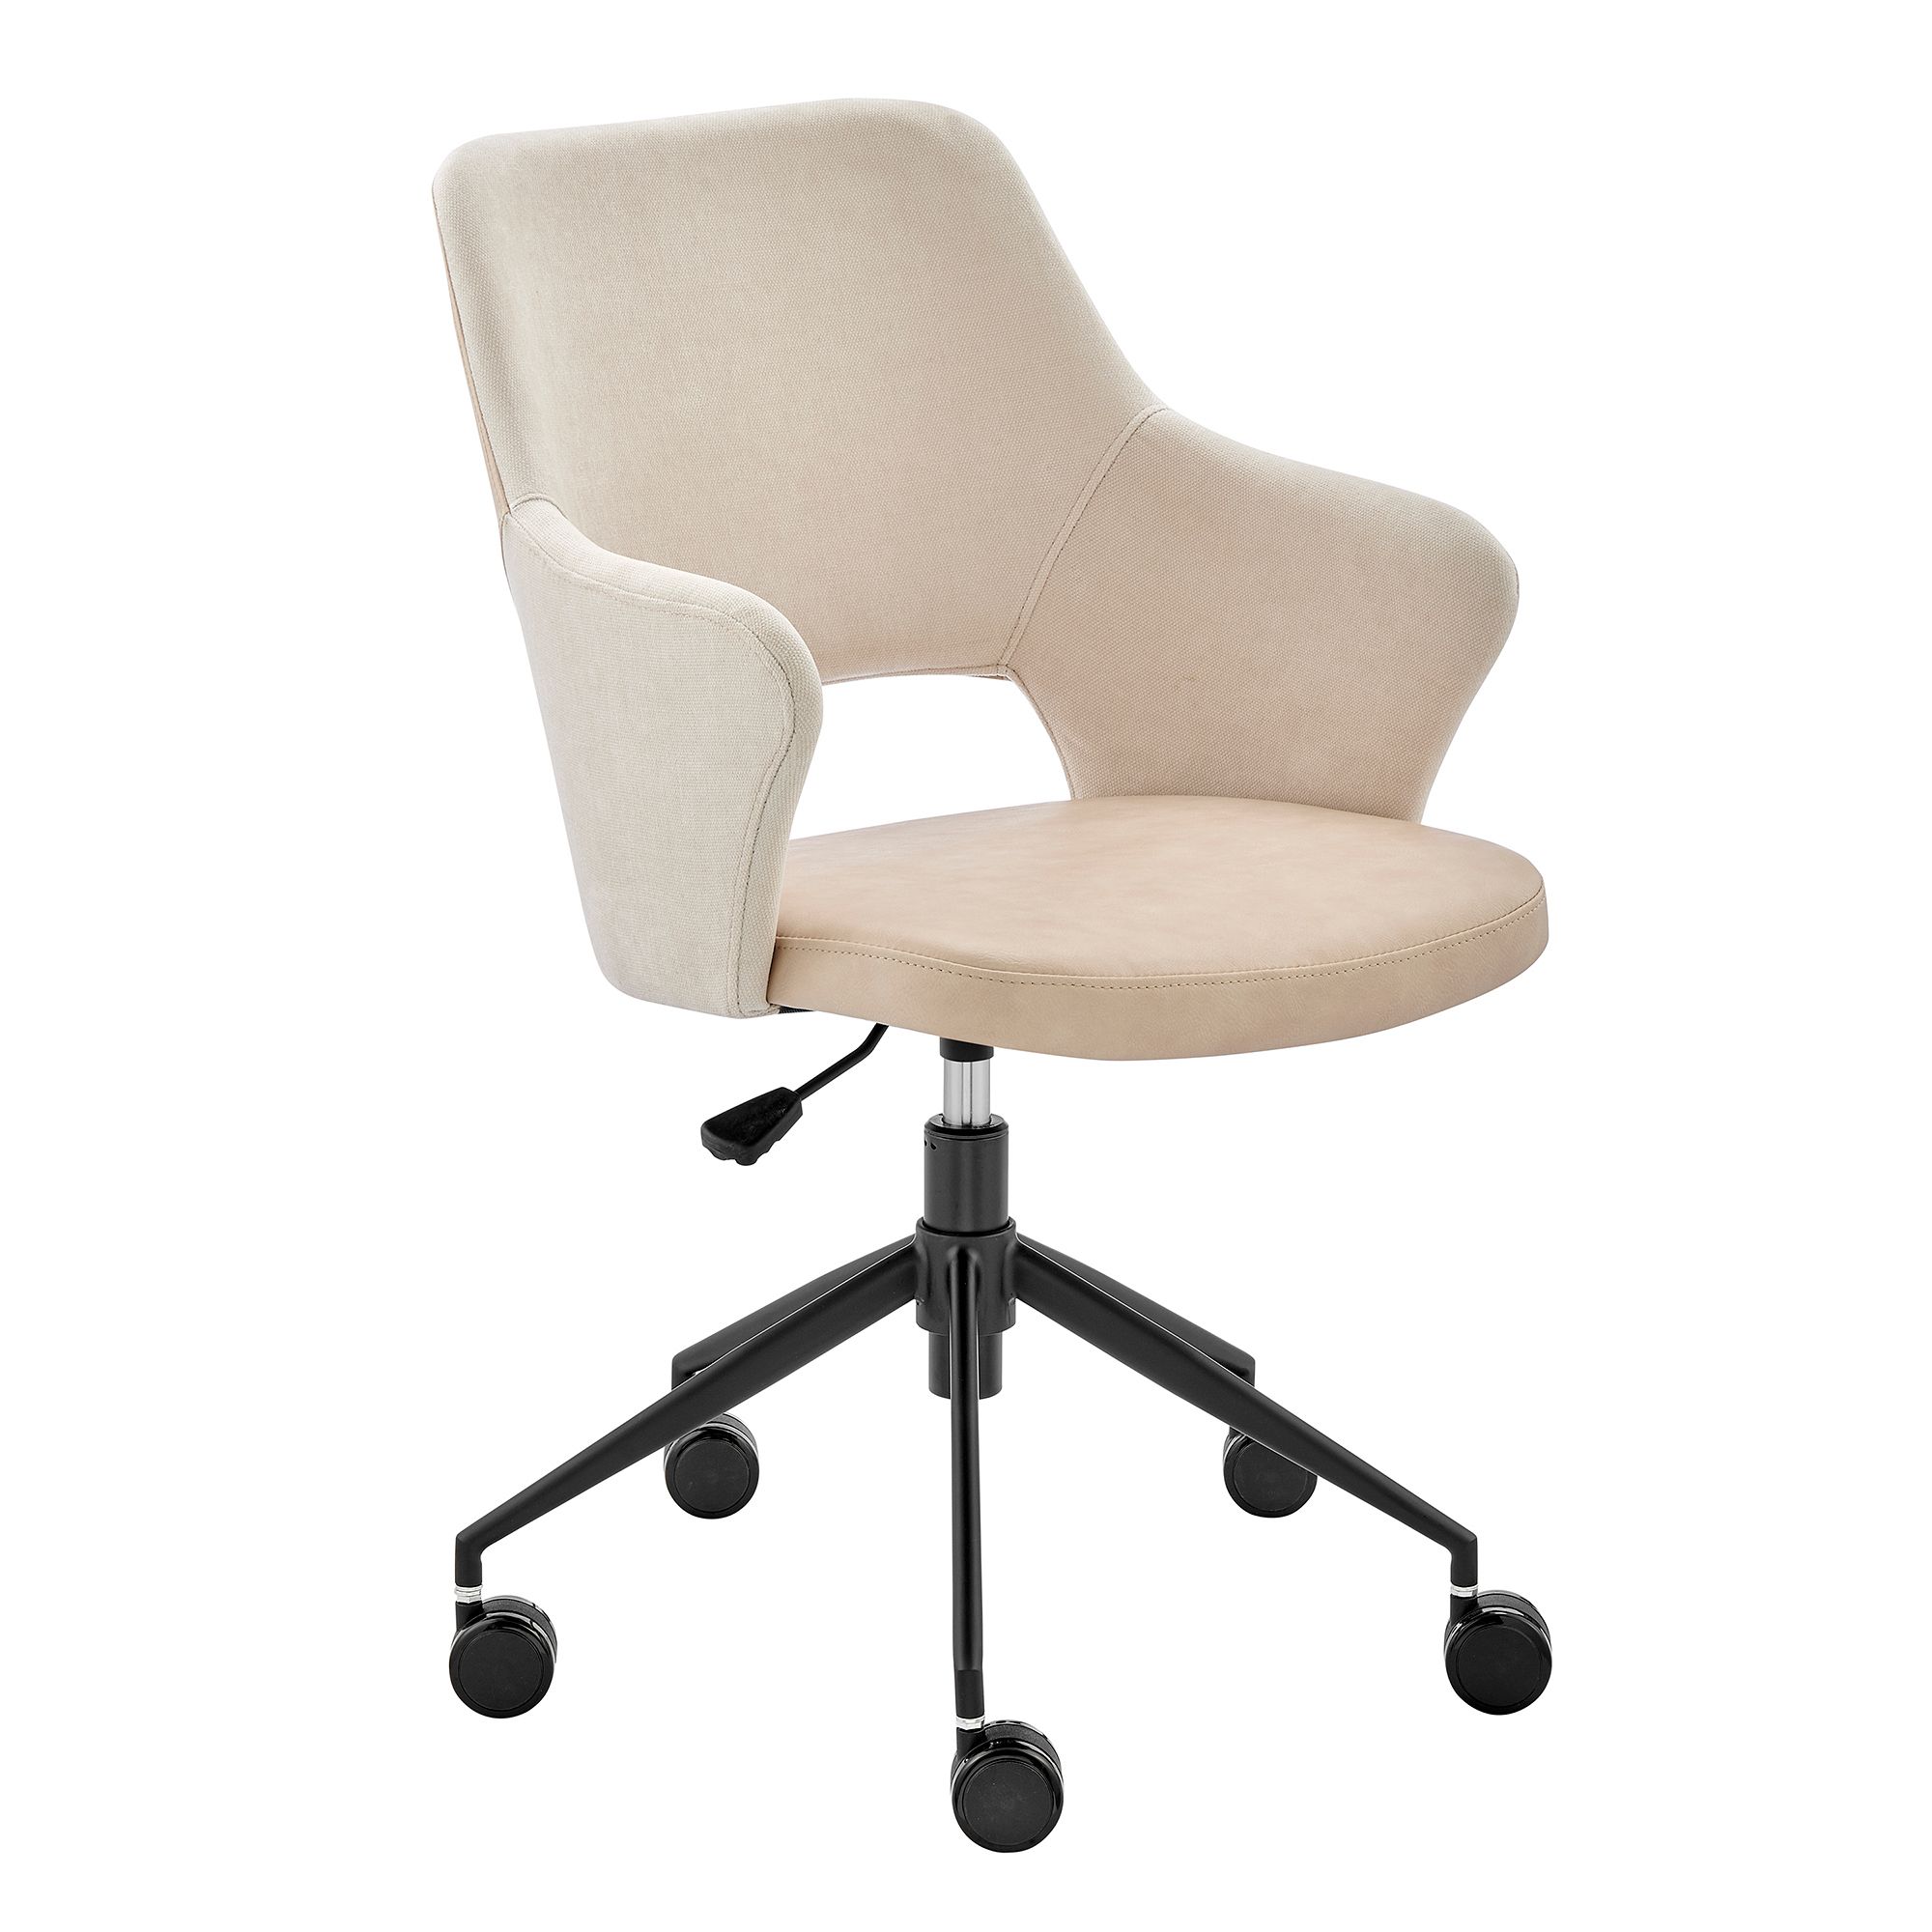 Upholstered Wraparound Office Chair | West Elm